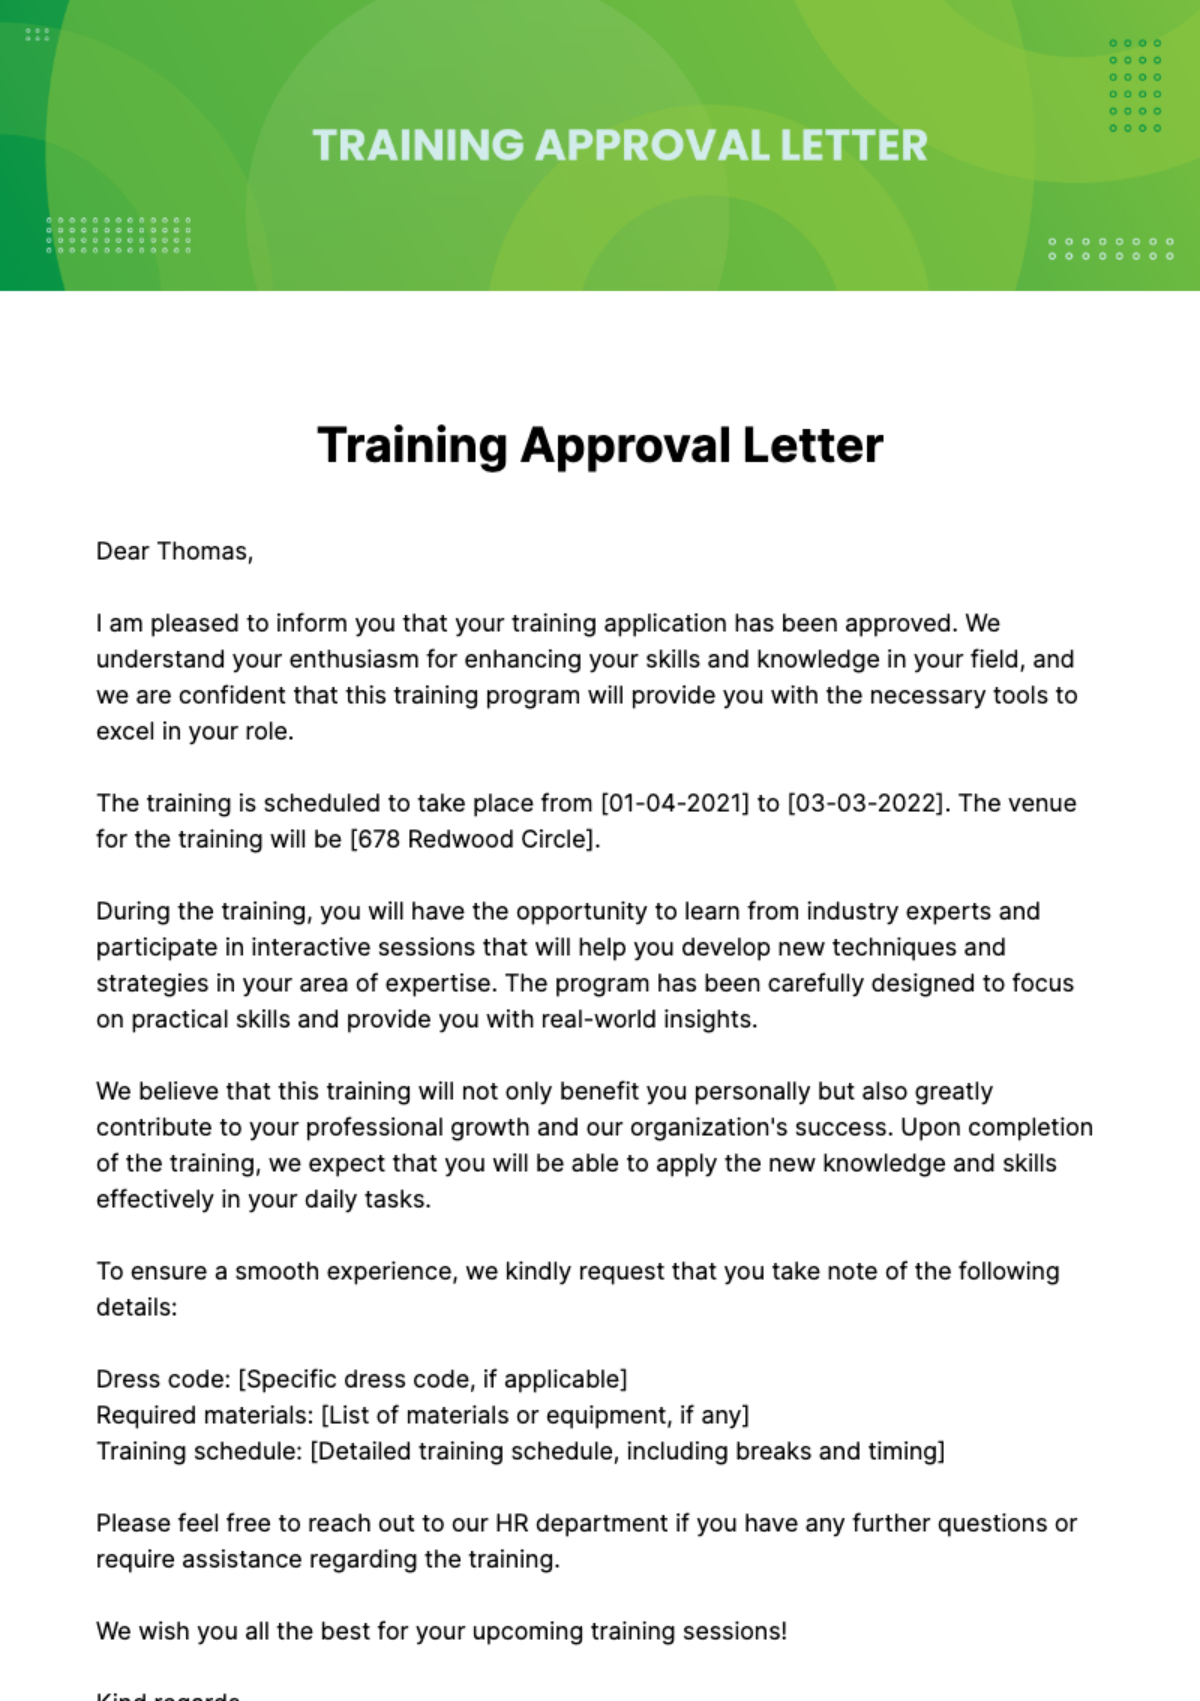 Free Training Approval Letter Template